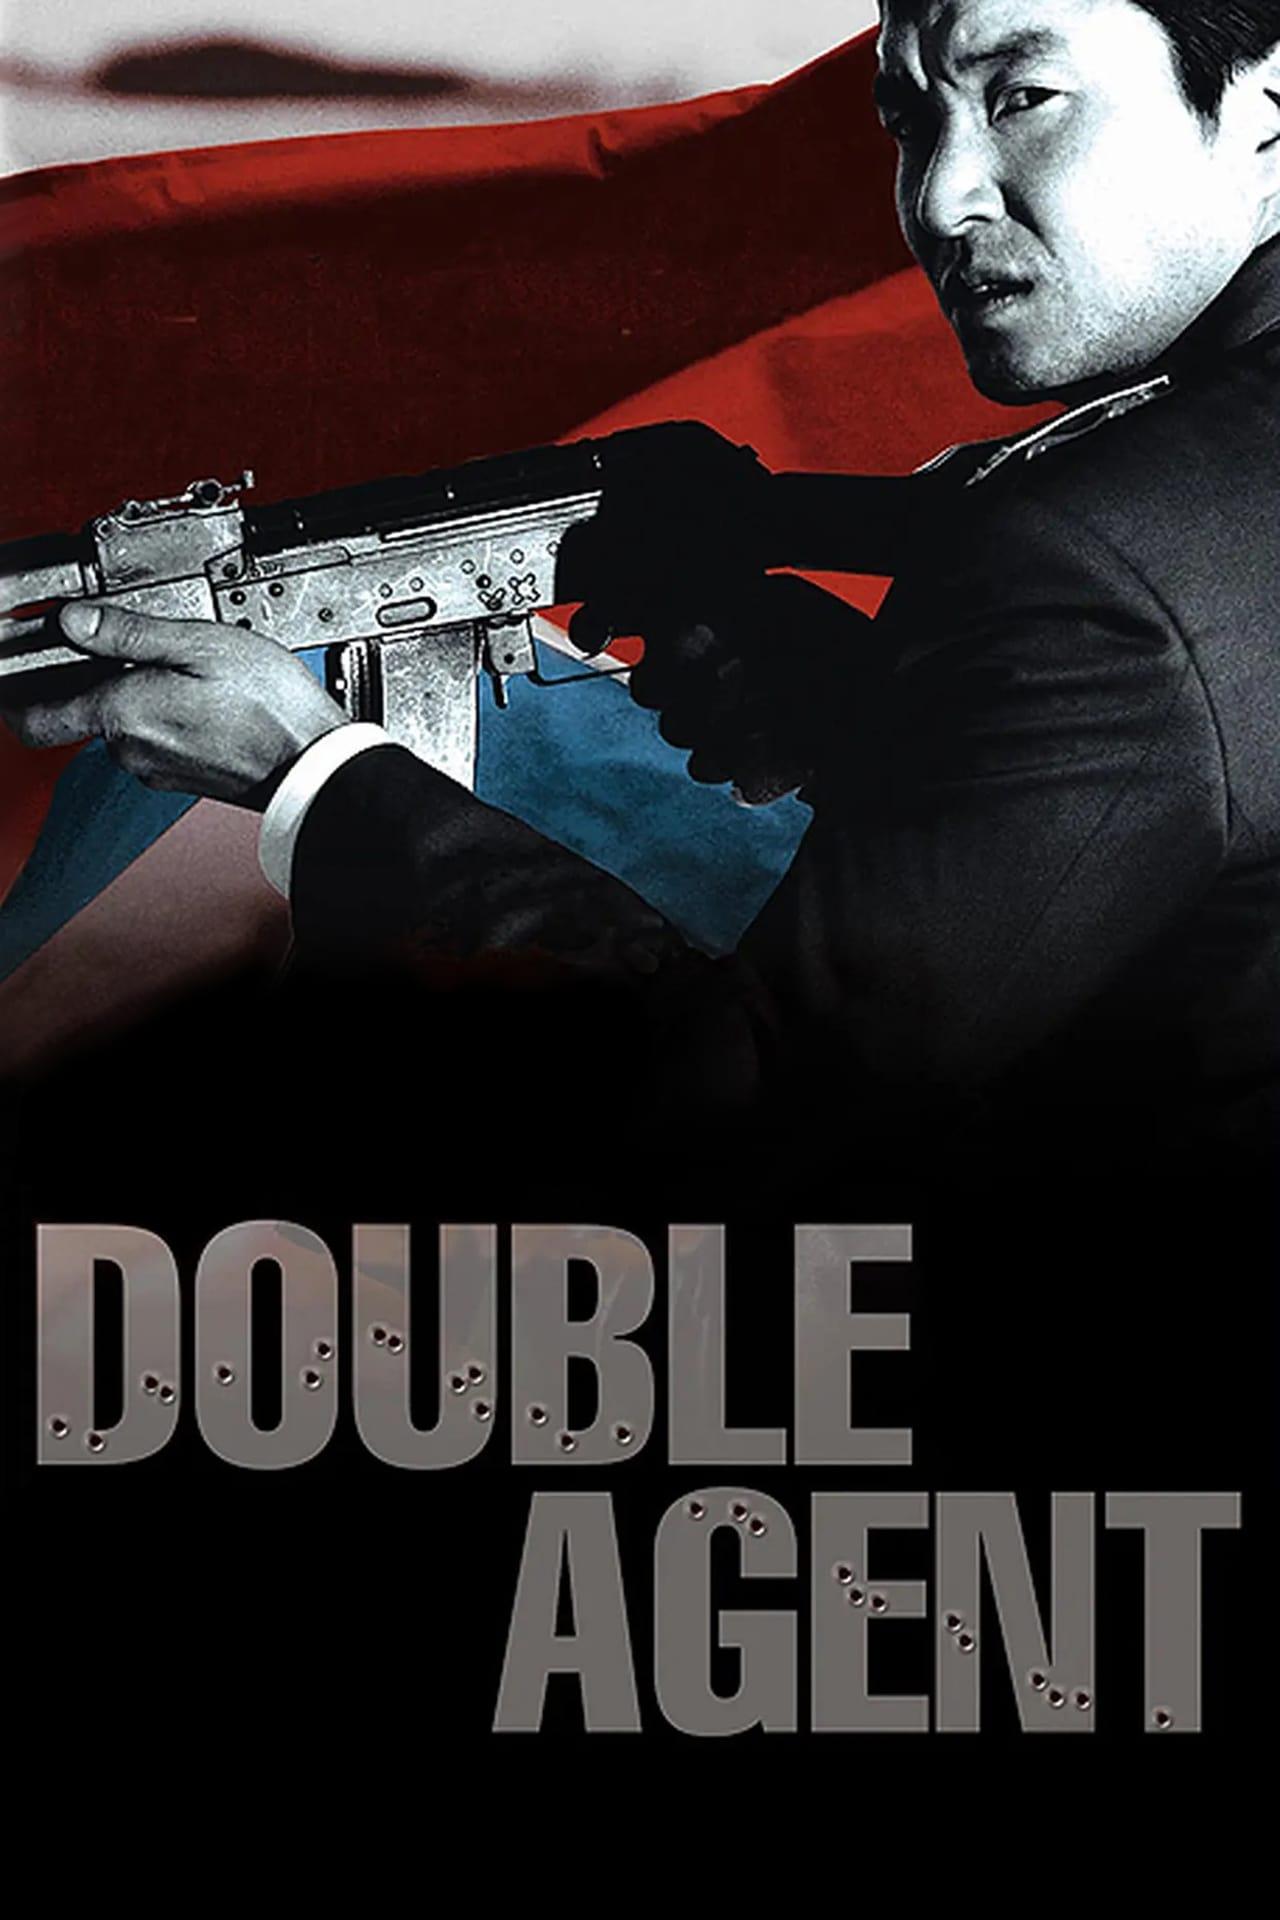 Double Agent poster